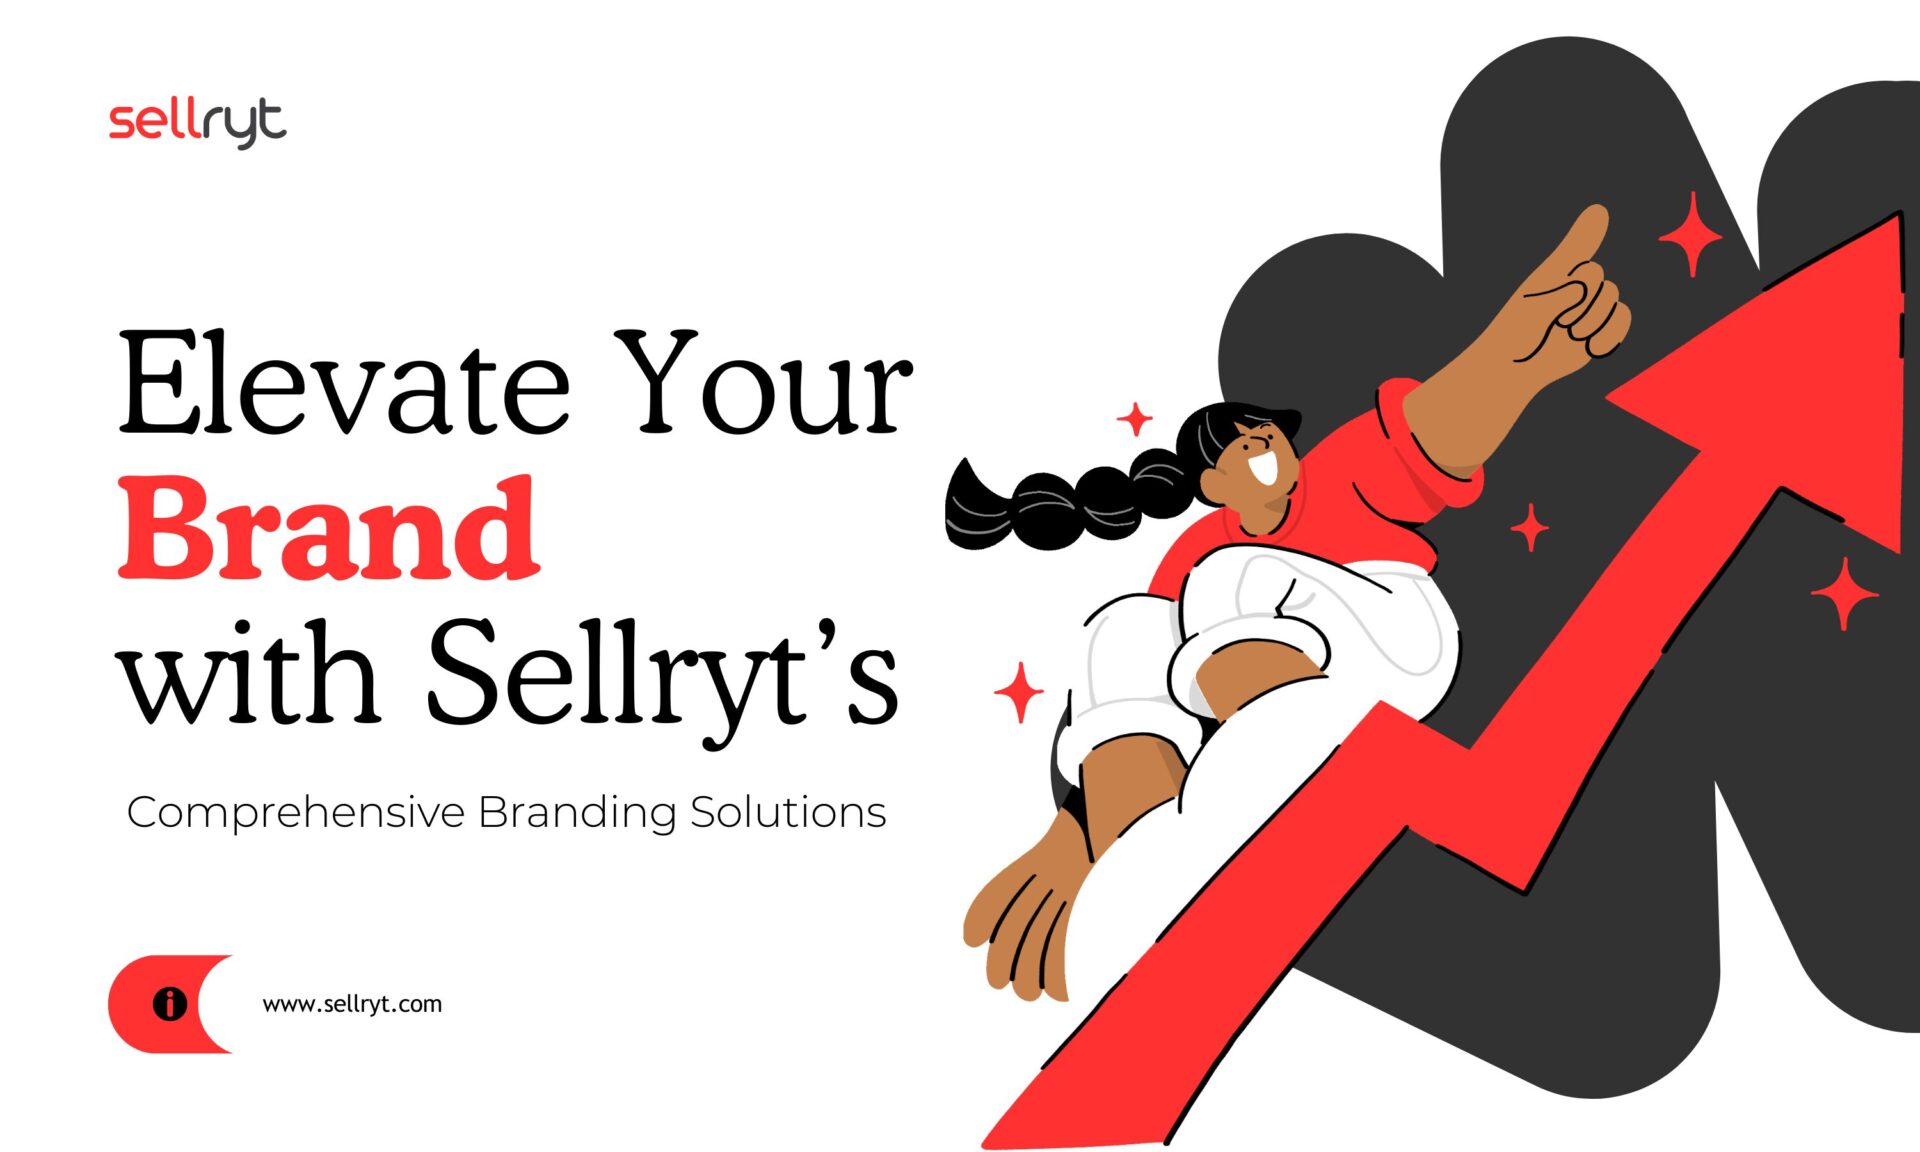 Elevate Your Brand with Sellryt’s Comprehensive Branding Solutions